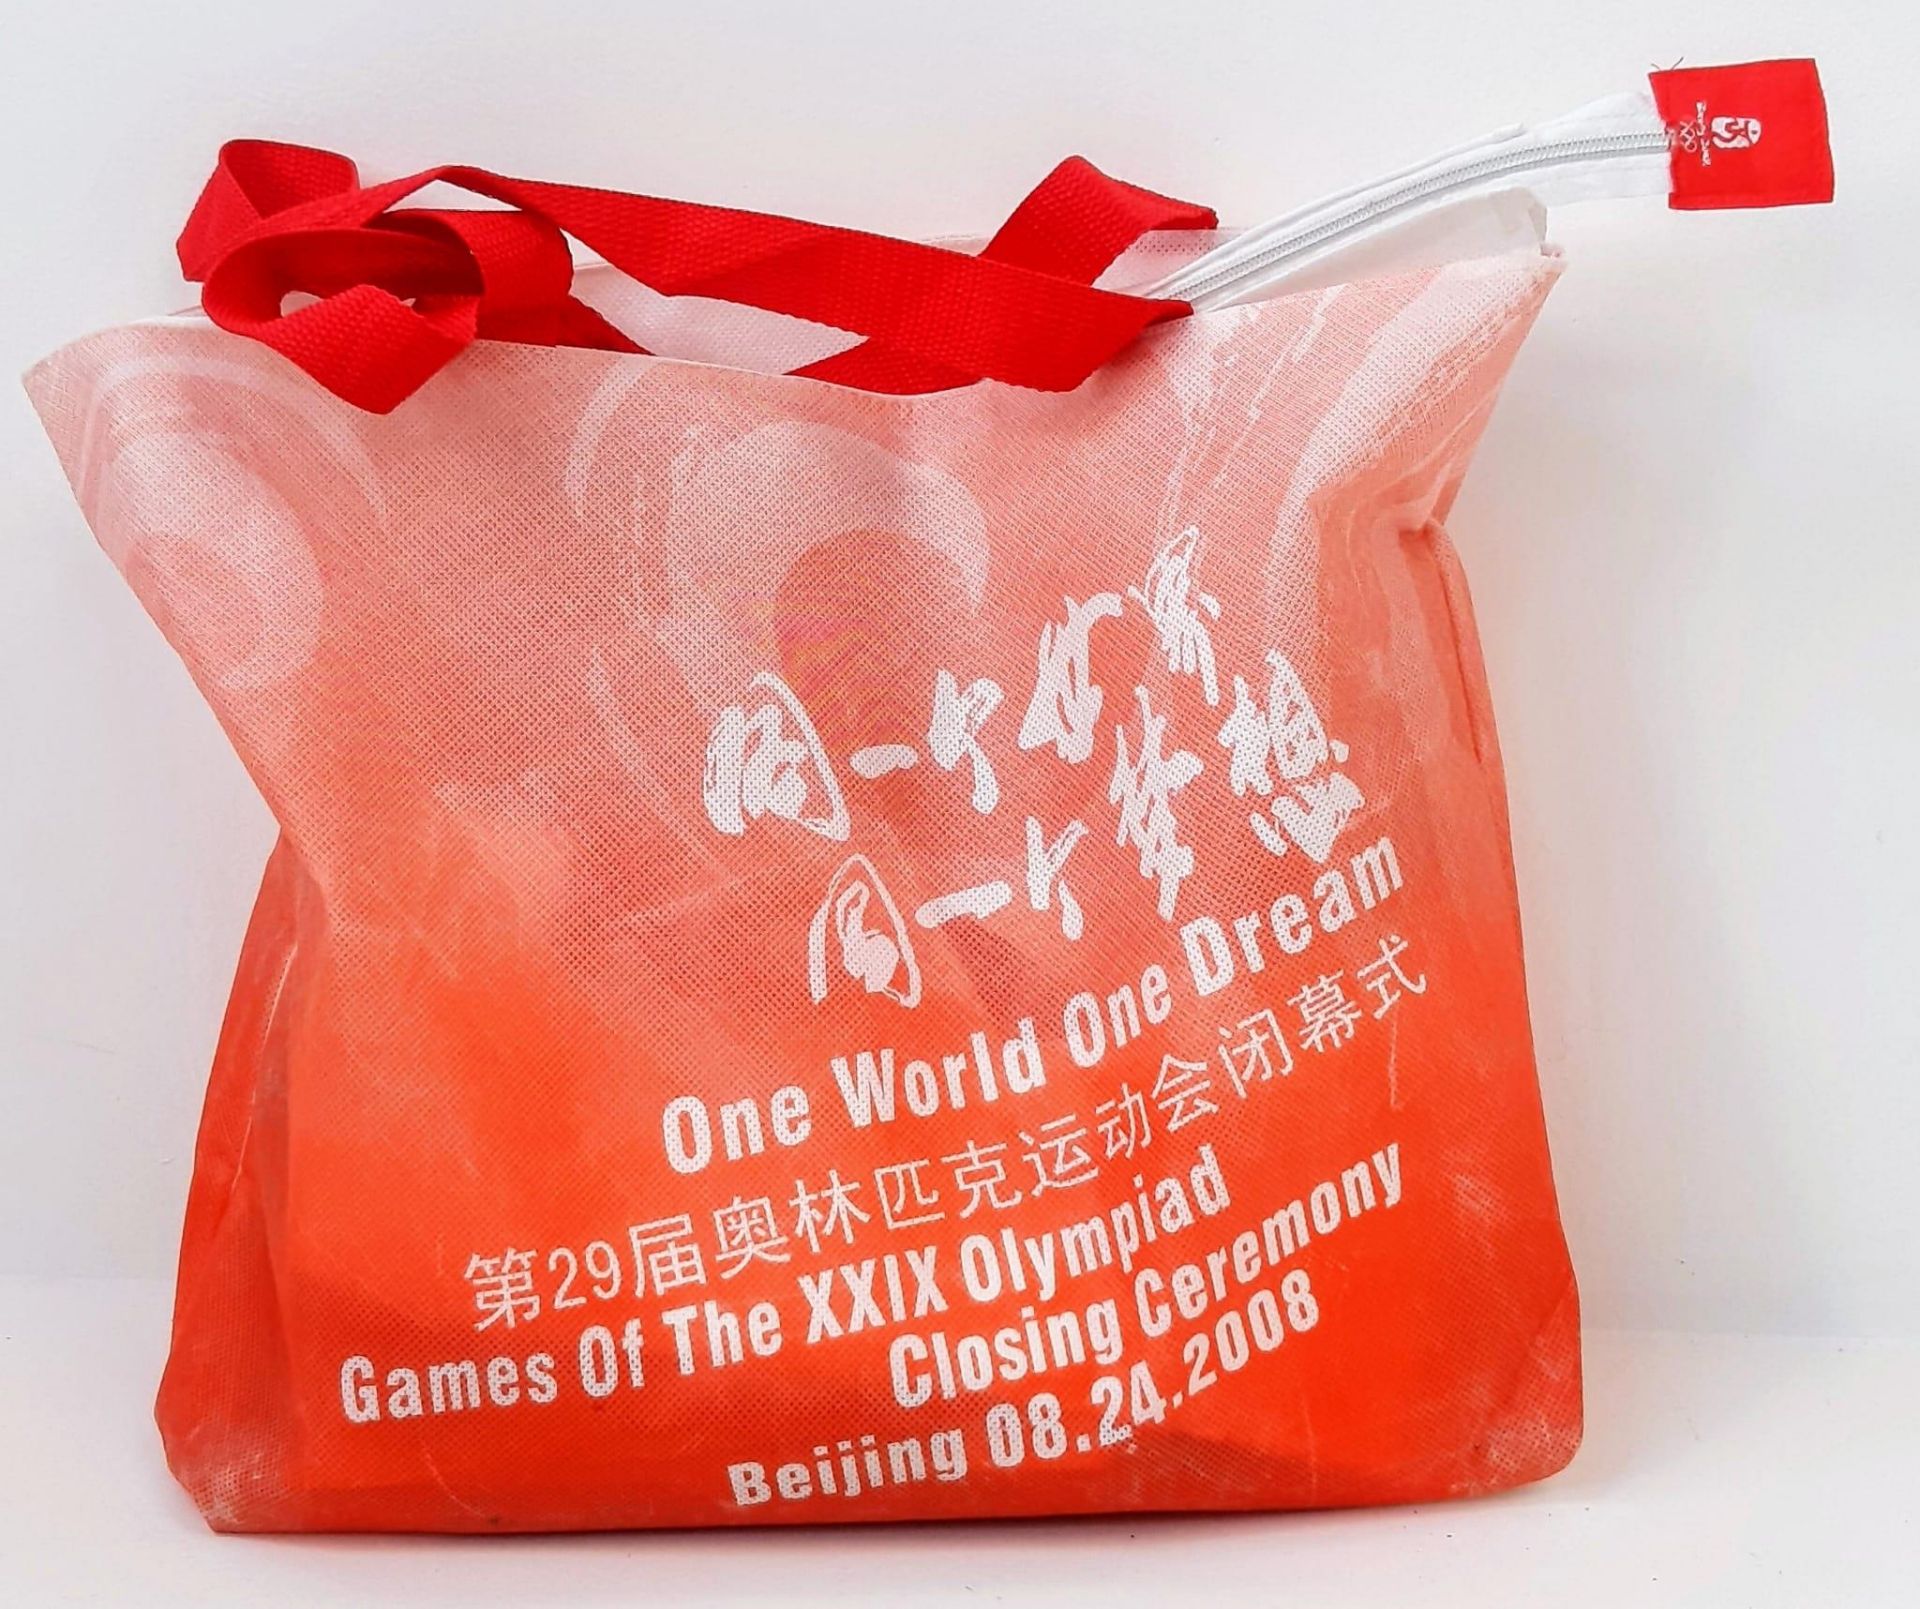 A Beijing 2008 Olympics Press/Media Pack. Includes tickets, brochures and other collectibles. - Image 12 of 12